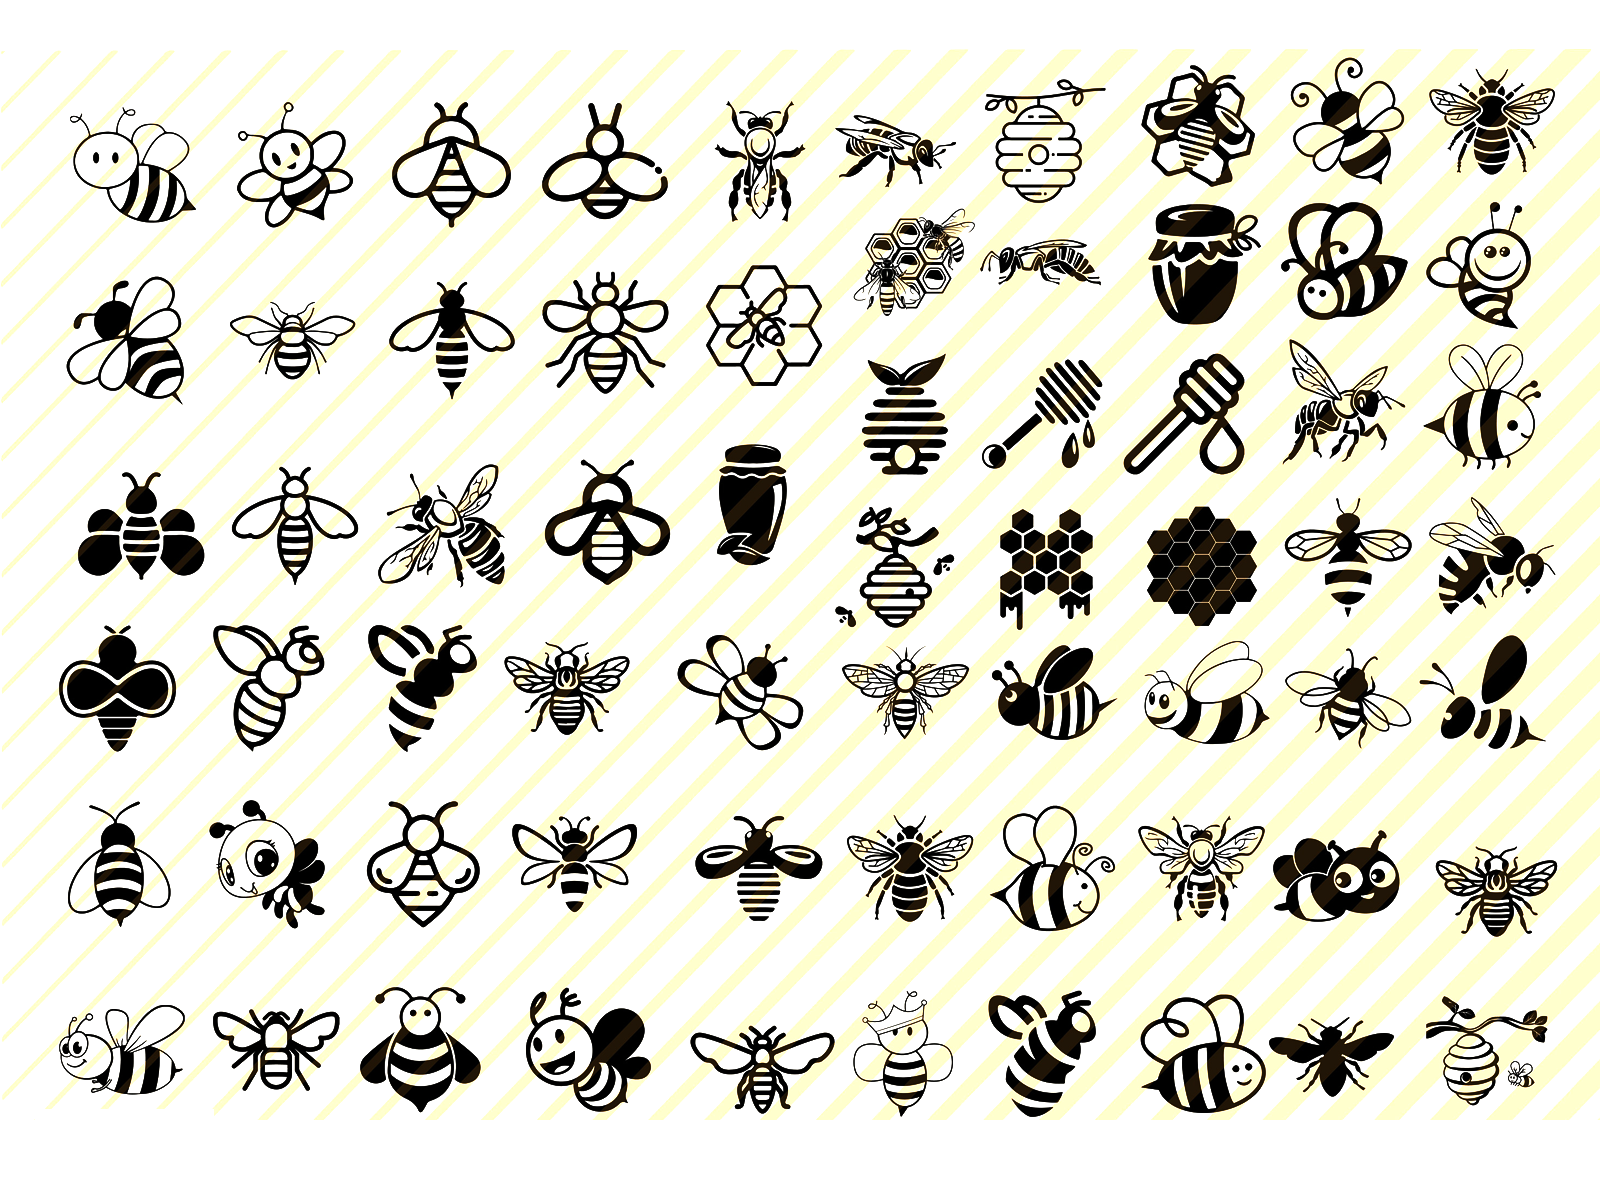 Download Bee Bundle Svg Bee Silhouette Bundle Bee Svg Bee Clipart By Vane Chista On Dribbble